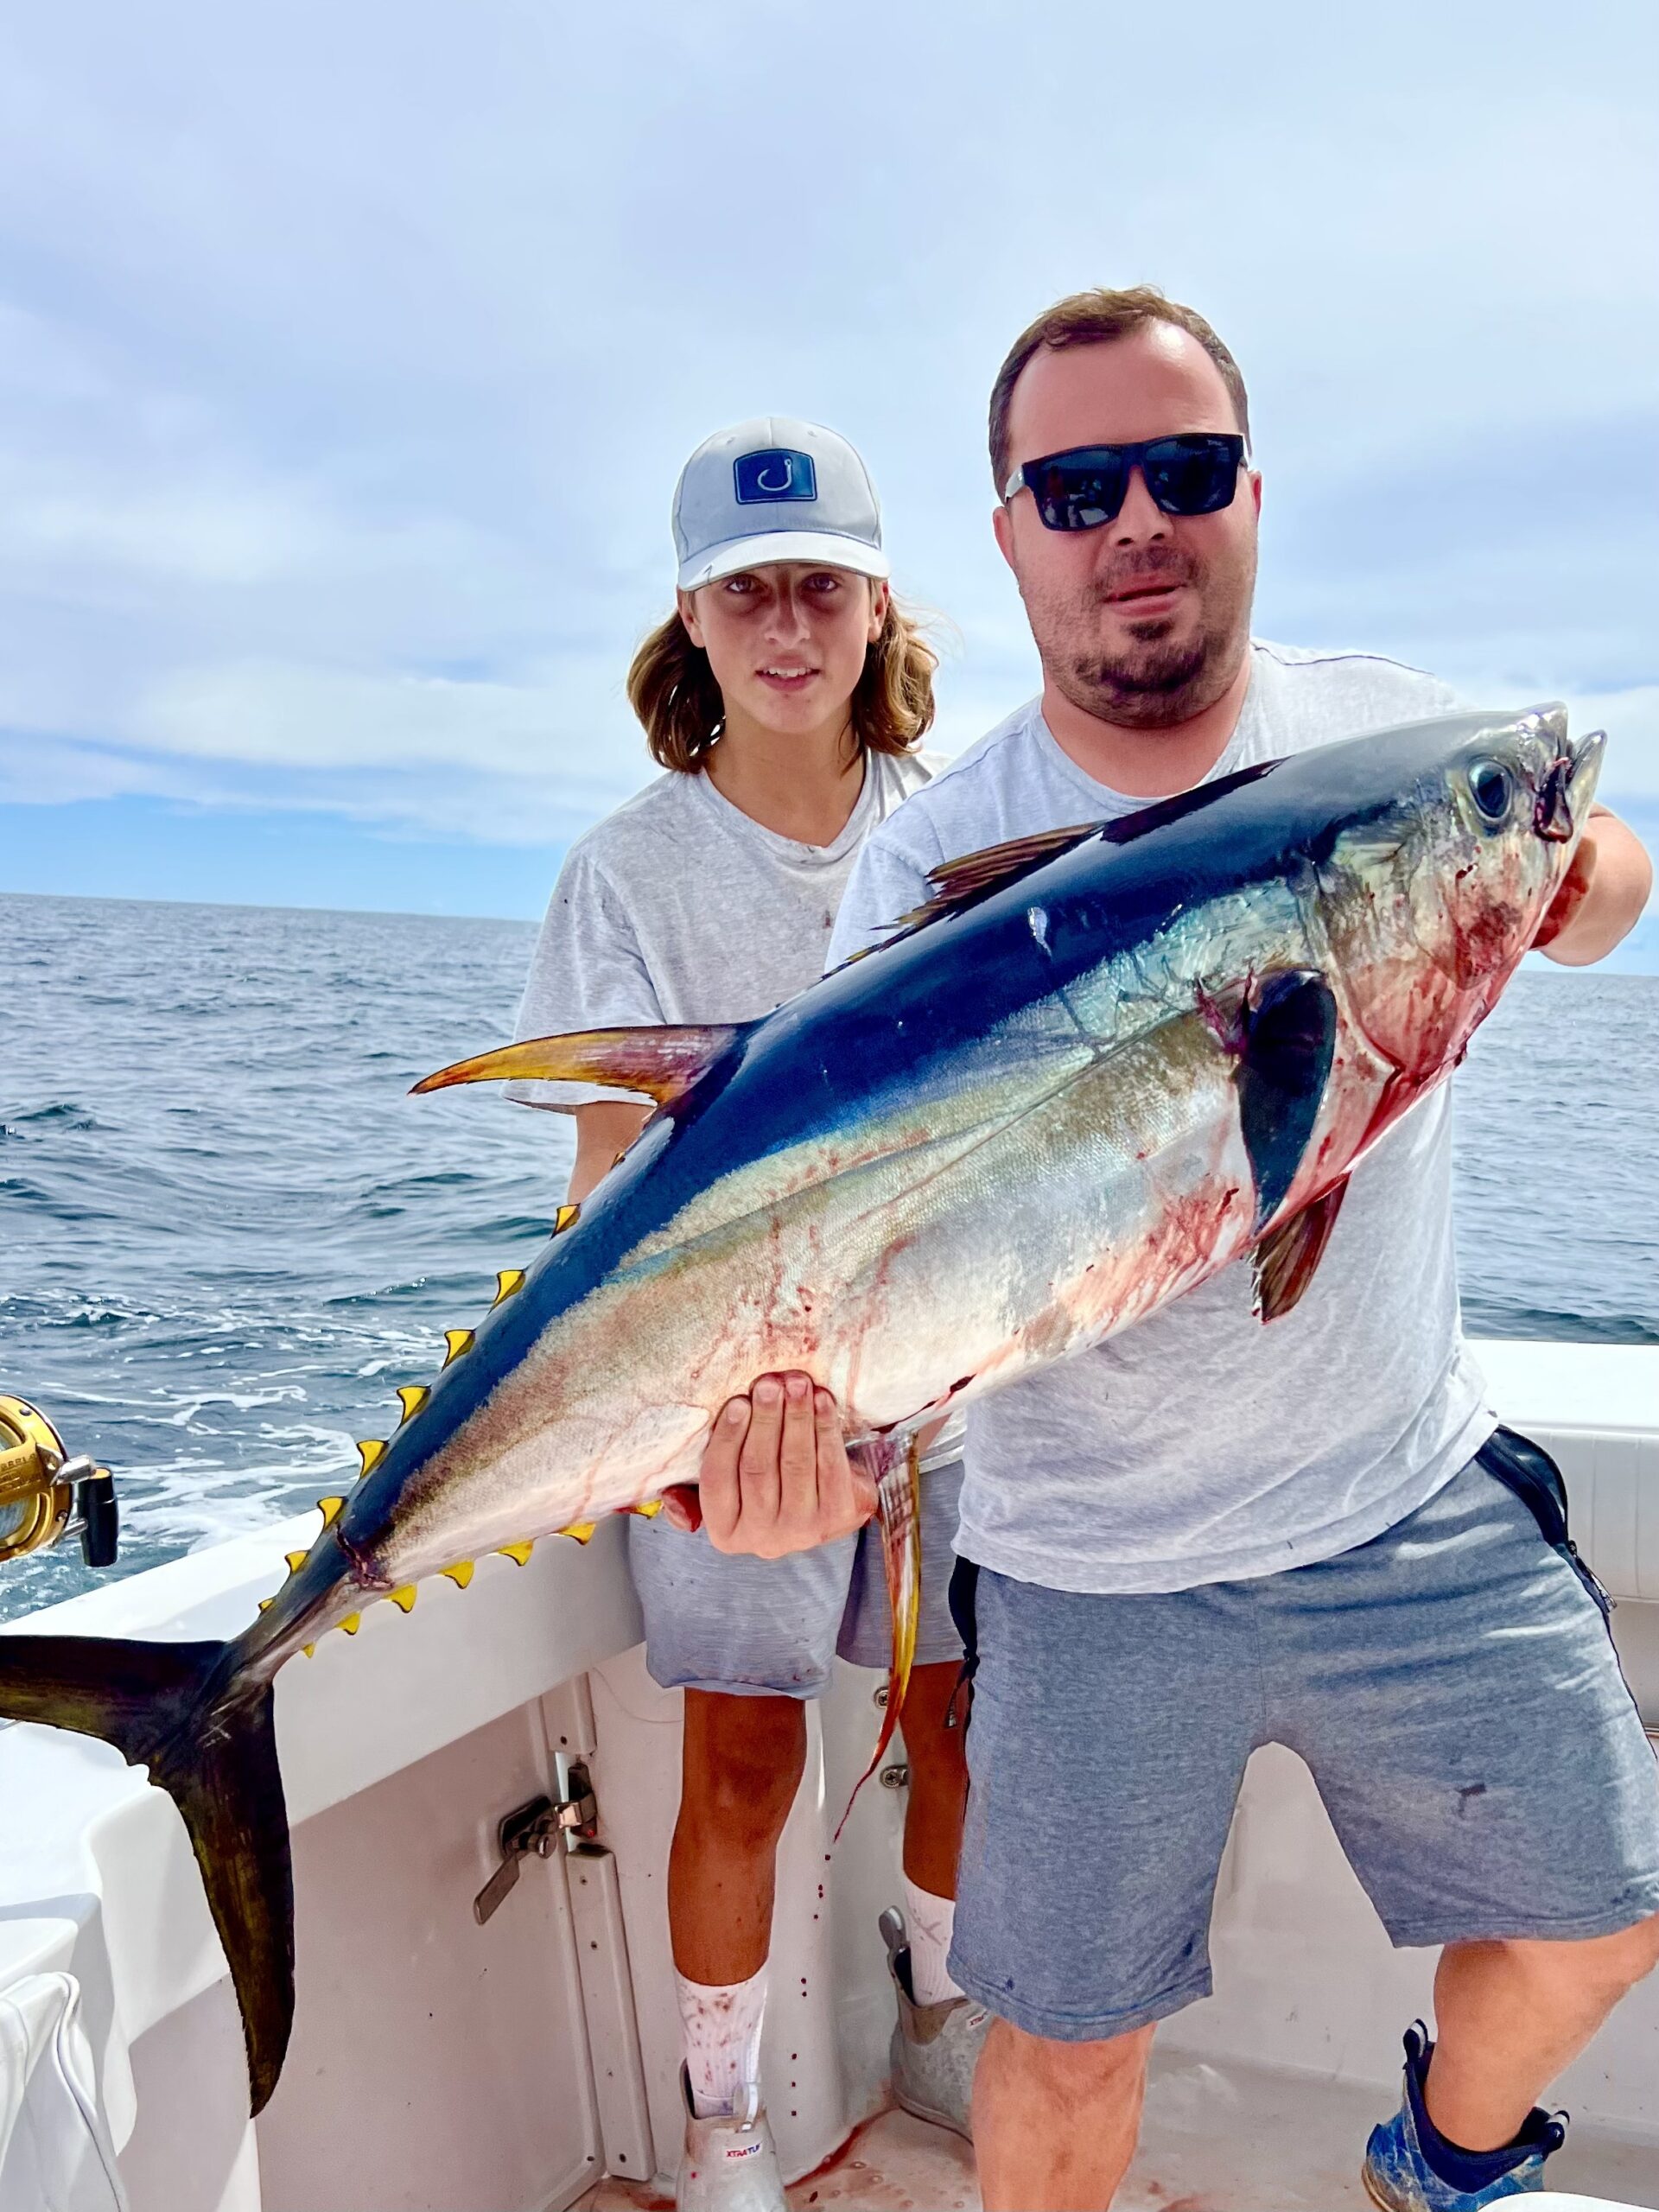 Marek Janota and Dayton McLear with a nice yellowfin caught on the inshore grounds off Montauk last week.